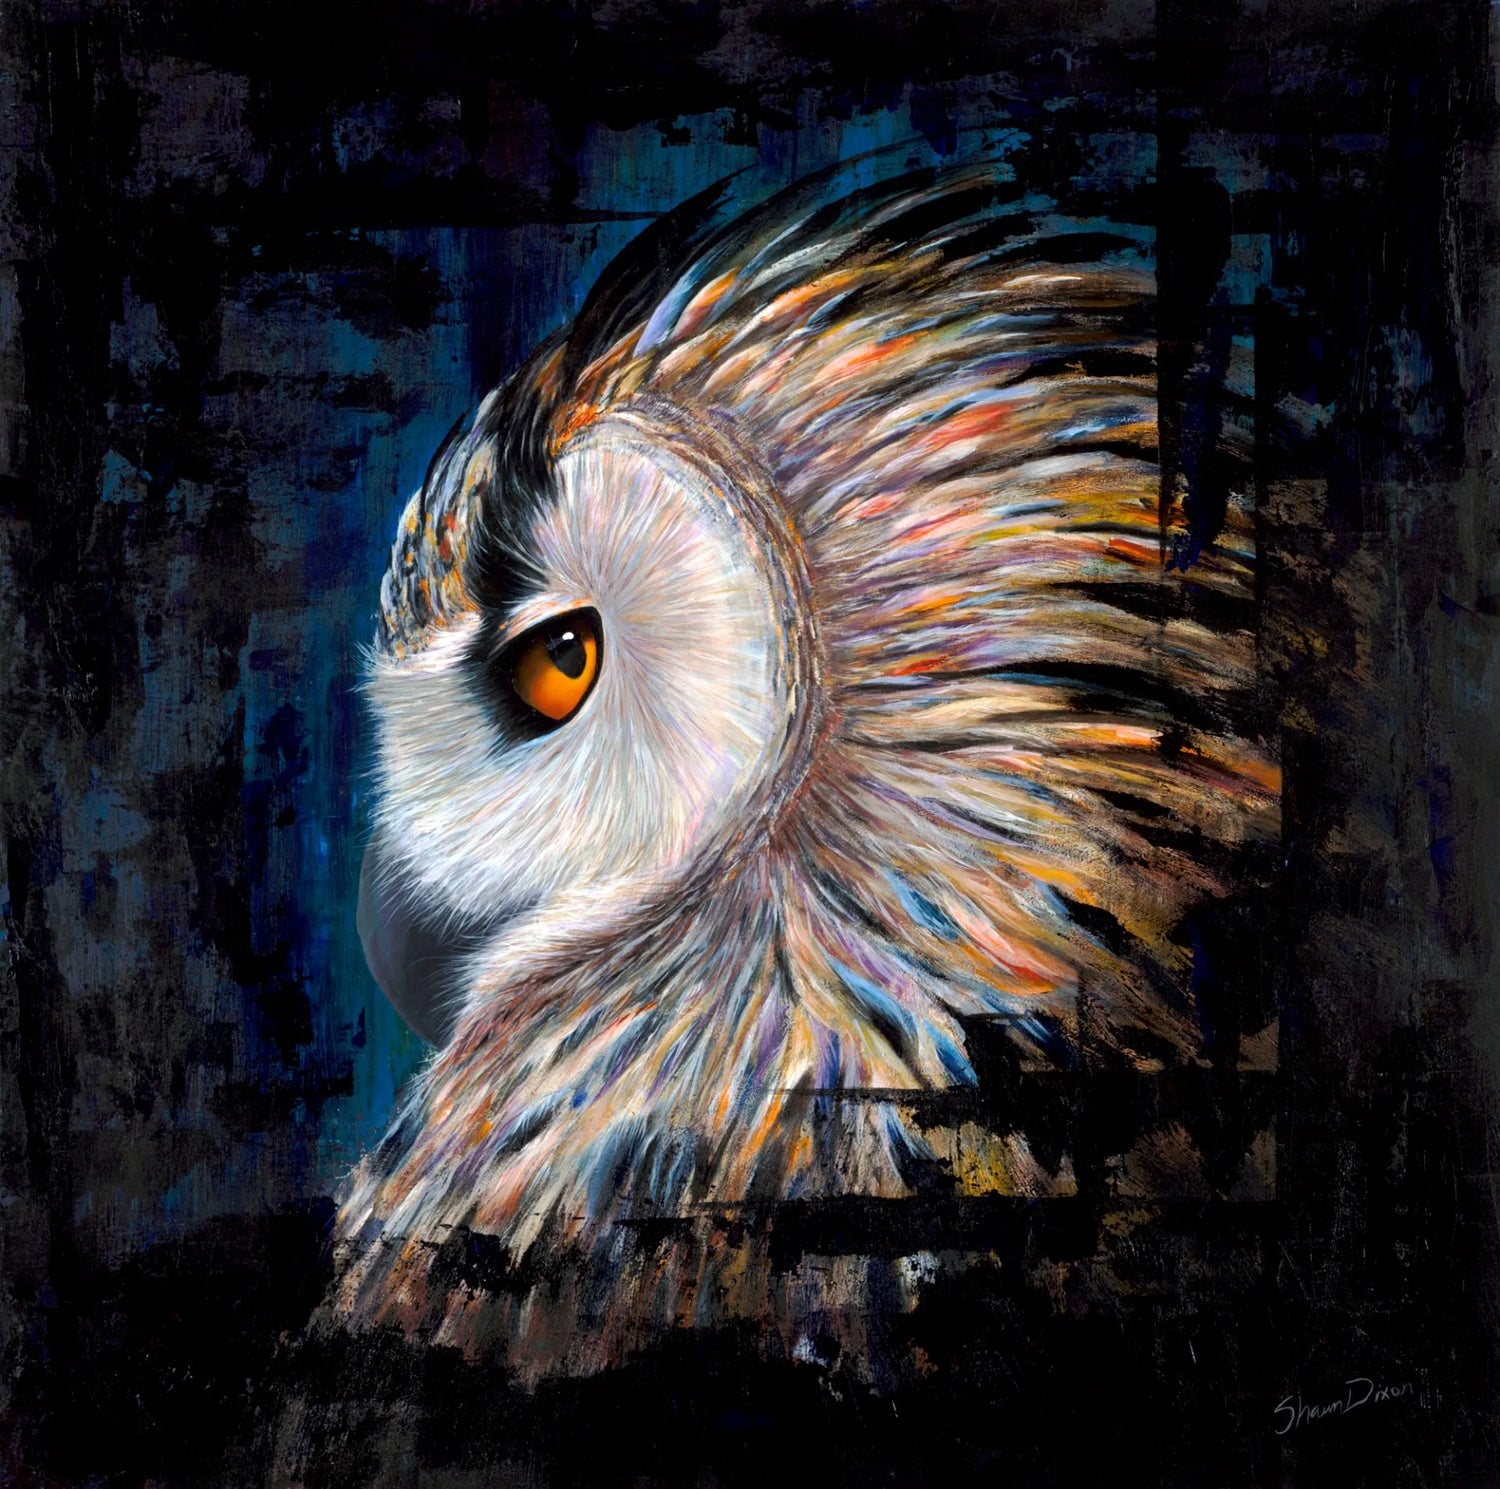 Owl oil painting on wood panel by Shawn Dixon